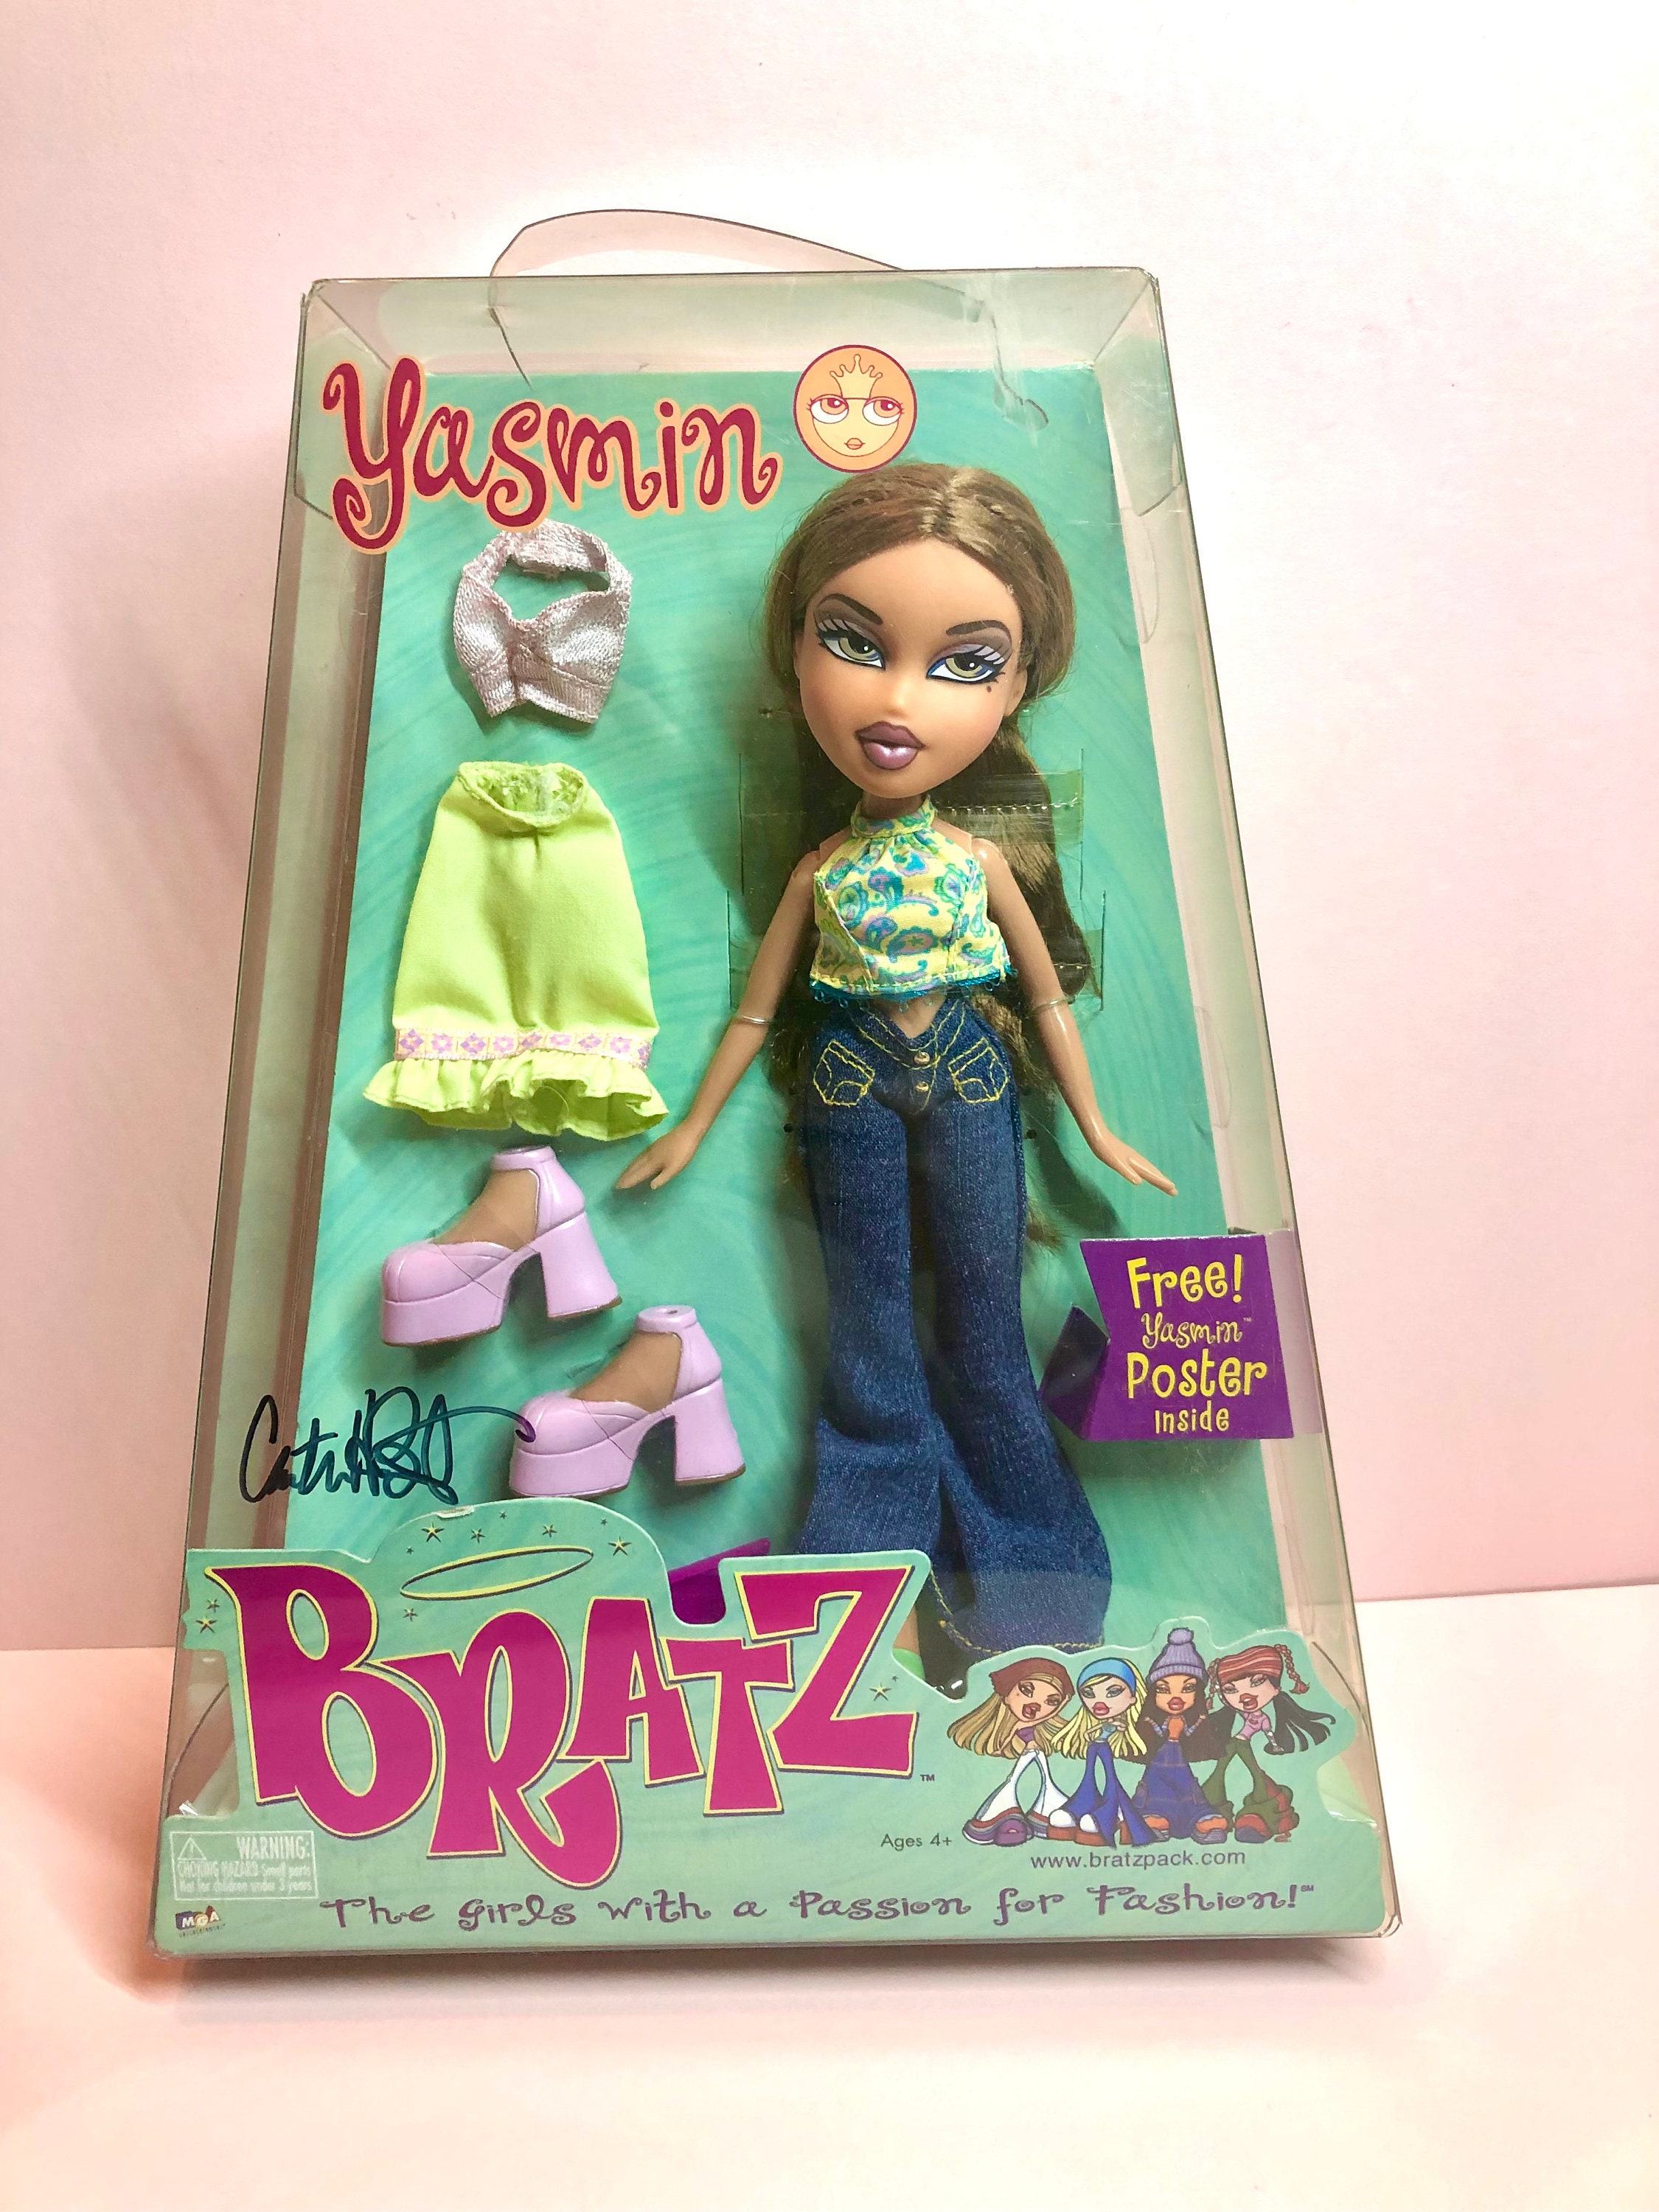 Bratz Beach Party Yasmin! Original 2002 edition. Autographed by Bratz  creator Carter Bryant, from his personal collection.